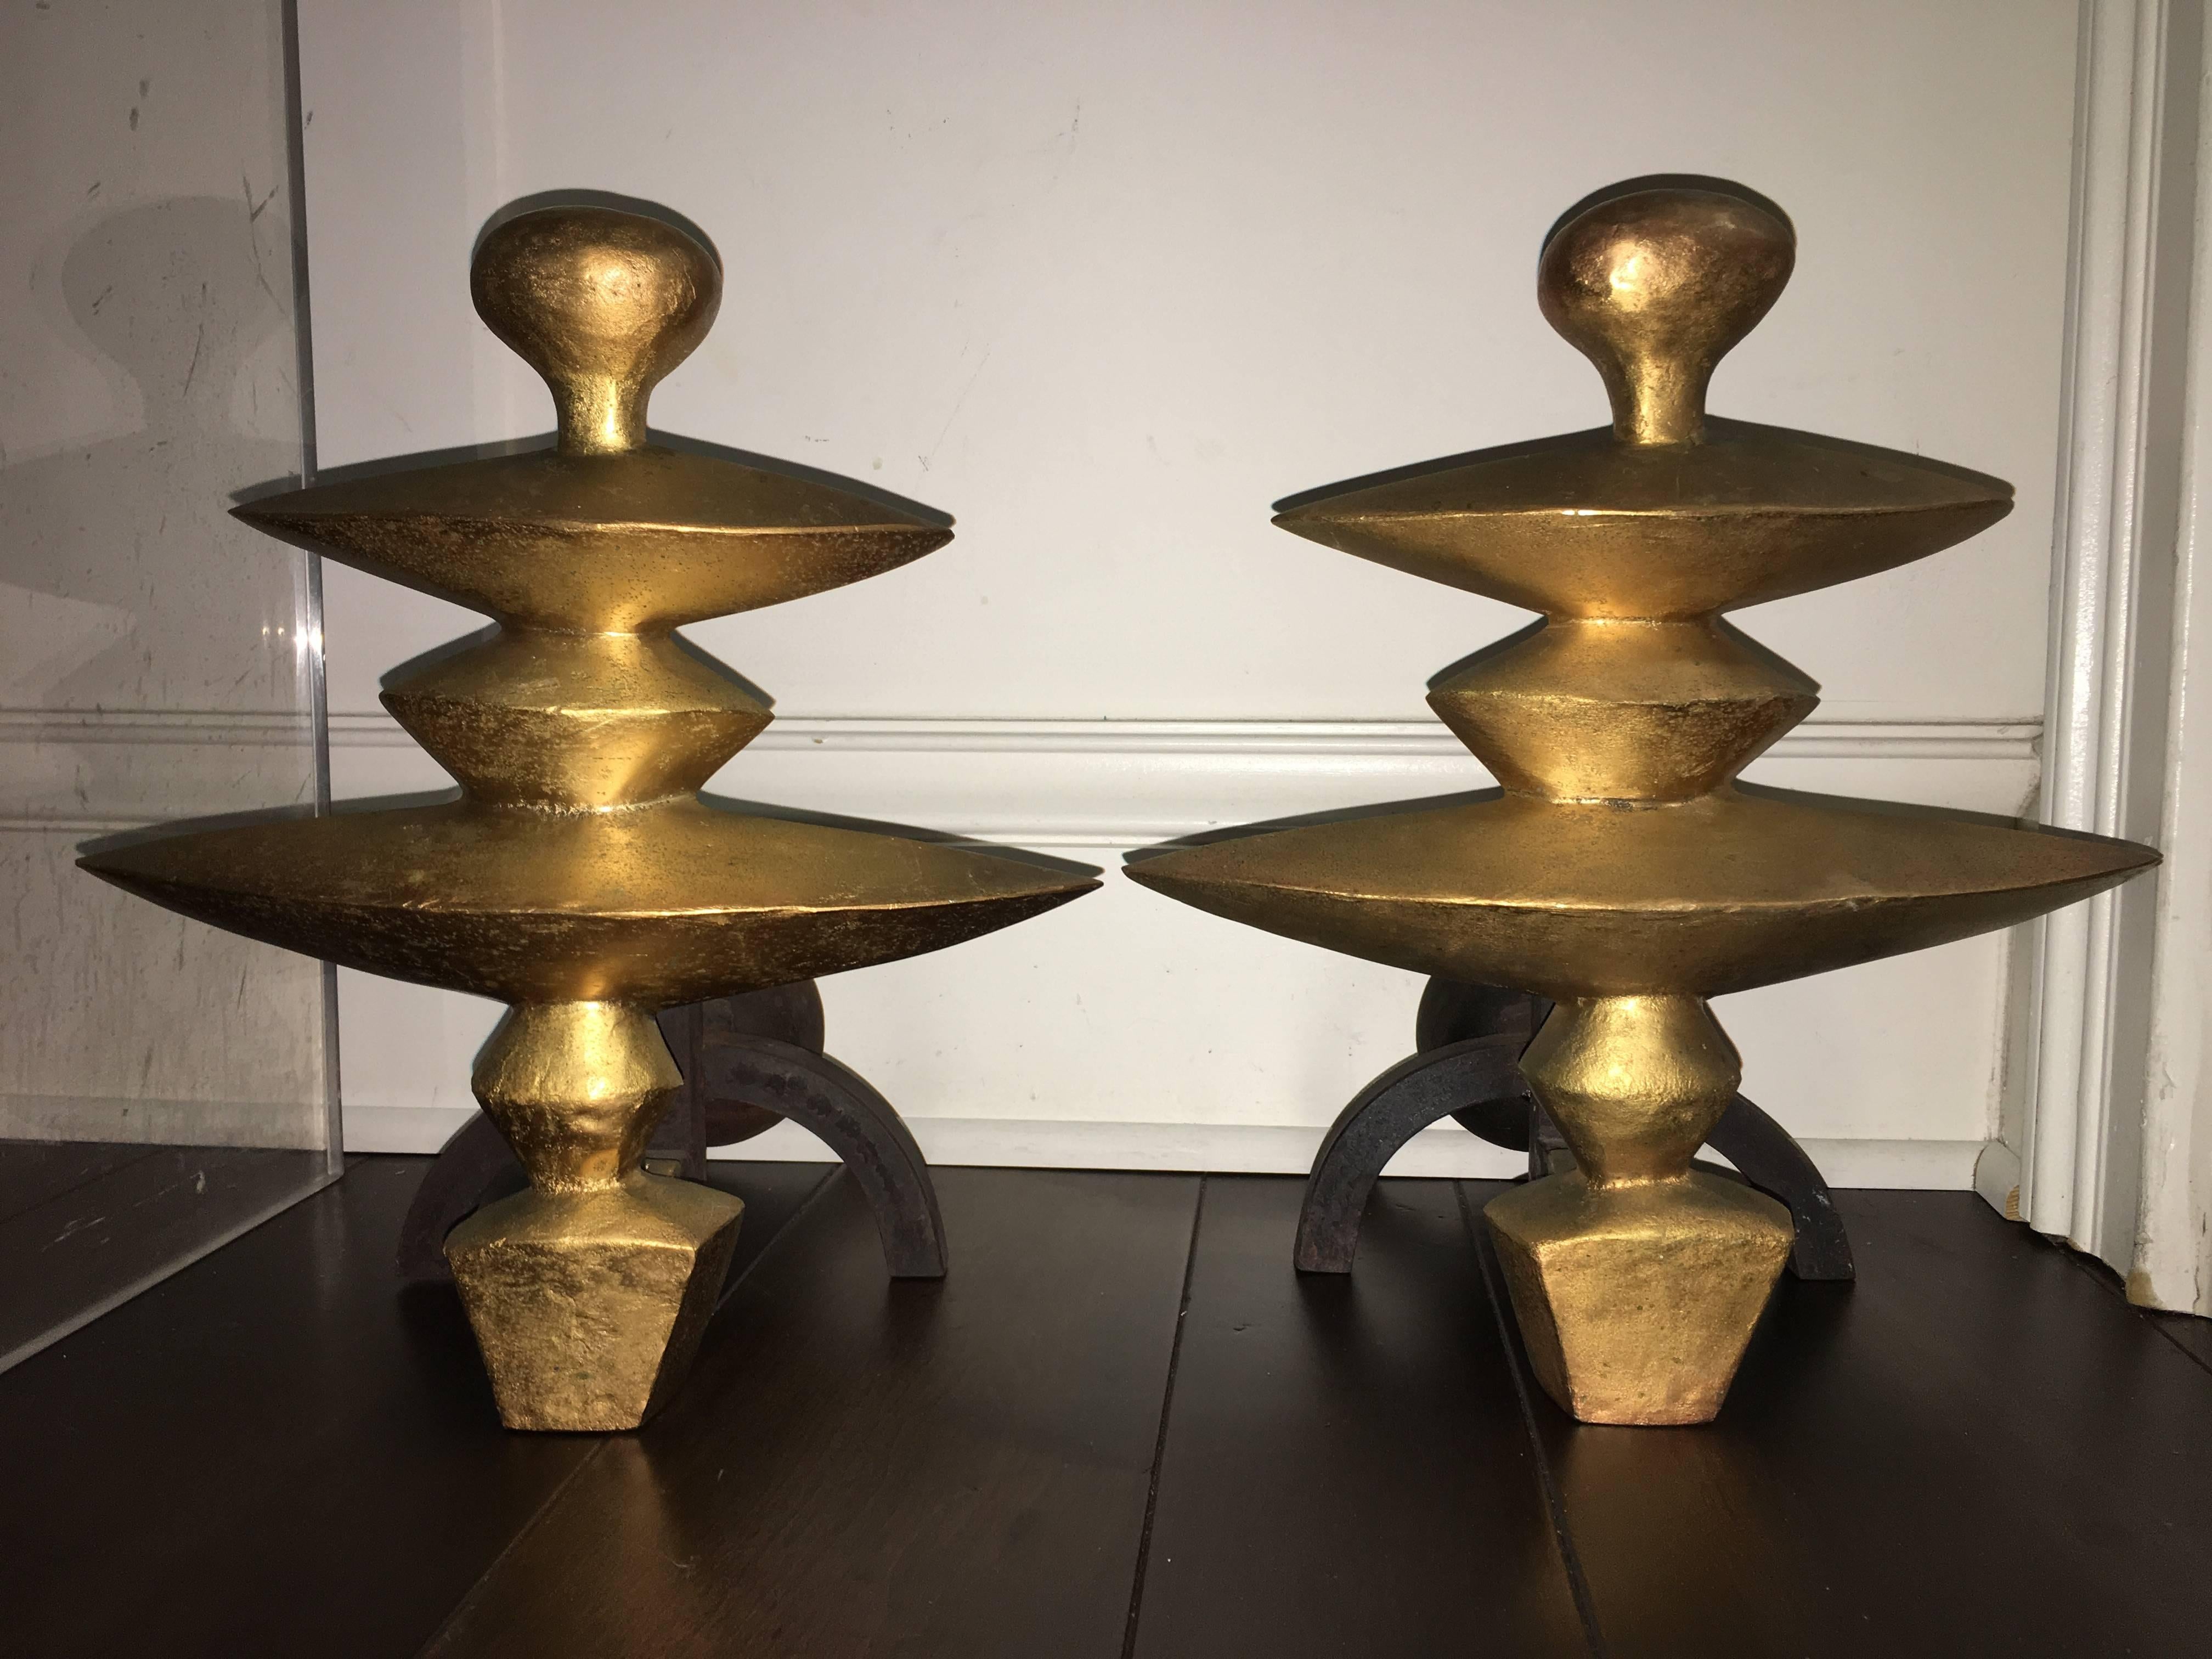 A pair of hard to find Andirons designed by Giacometti and produced in 1978 for Nelson Rockefeller Collection. Comprised of gold gilded bronze with iron back weights. Signed and dated C 1978 NR.